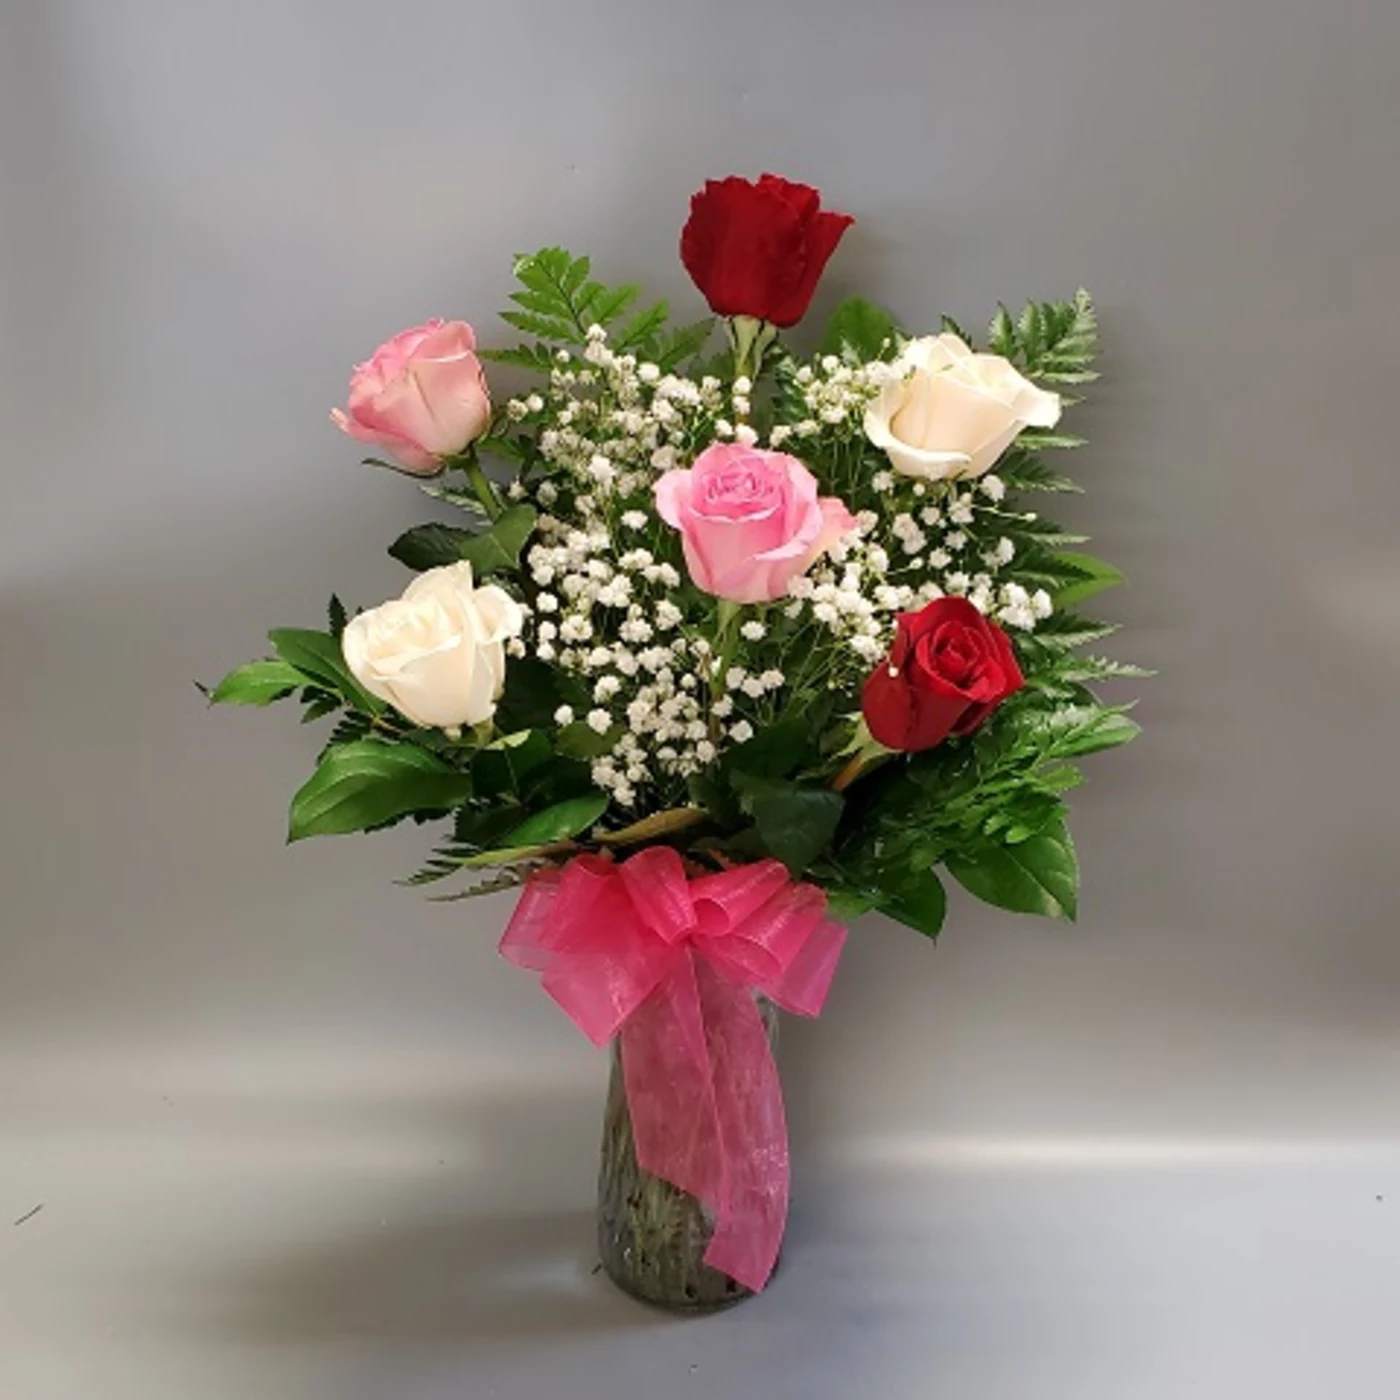 Shades of Pink and Red - EXCLUSIVE She'll be blushing for sure when our beautiful bouquet of pink and red long-stem roses arrives at the door! Hand-gathered by our expert florists in a vase, we can't think of a more colorful way to express yourself to someone very special. Gorgeous bouquet of premium long-stem pink and red roses, accented by fresh waxflower and salal Artistically arranged by our expert florists in a stylish glass gathering vase.